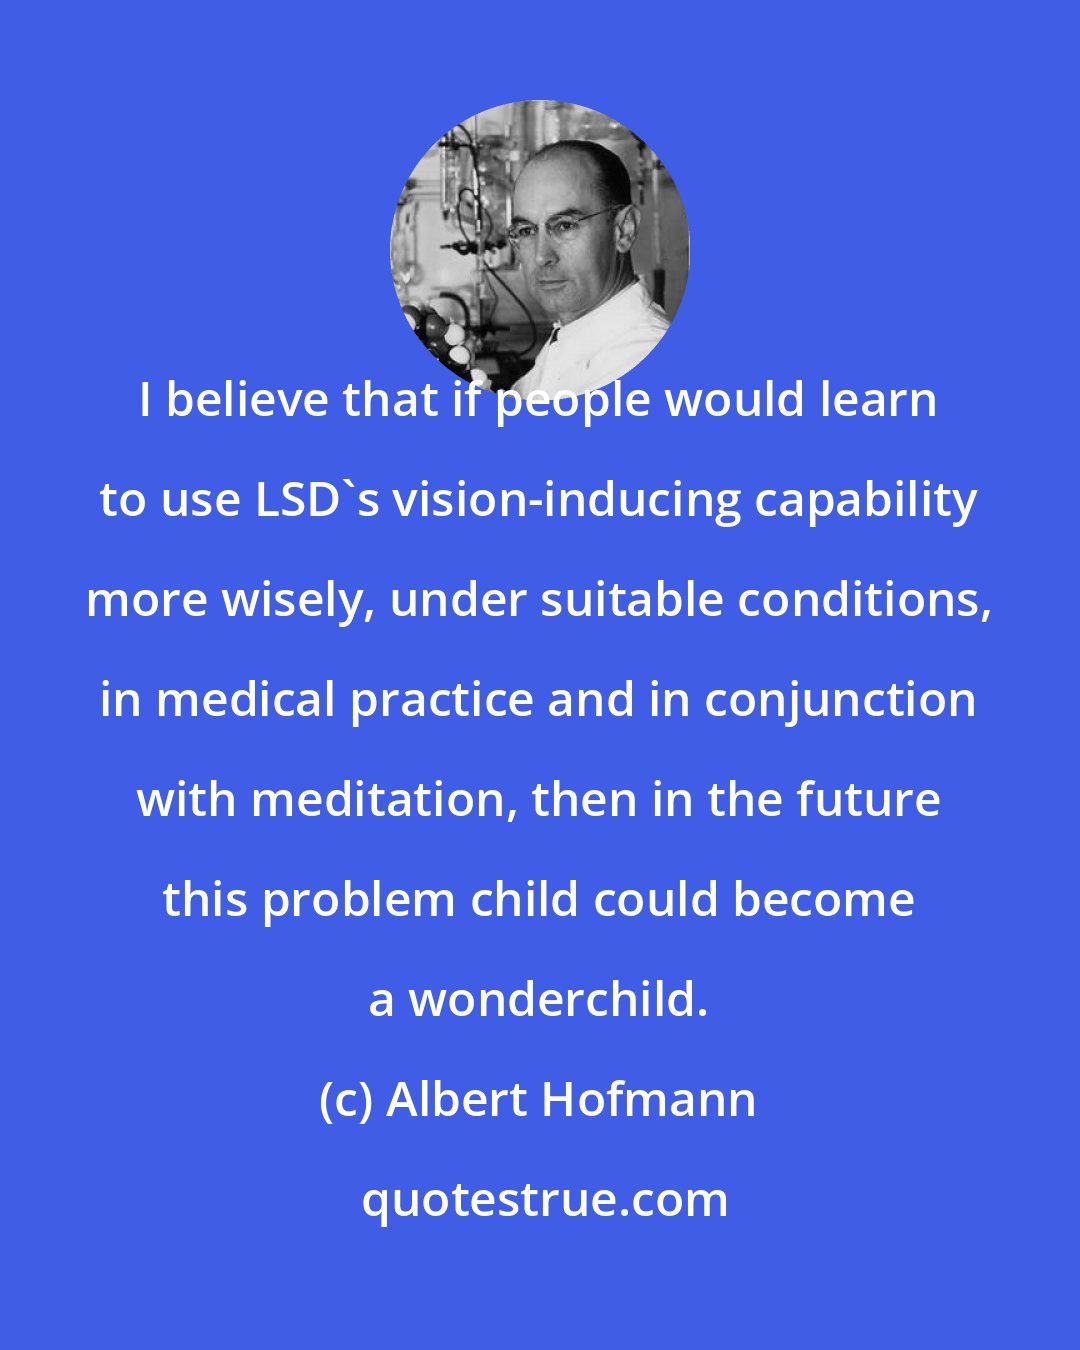 Albert Hofmann: I believe that if people would learn to use LSD's vision-inducing capability more wisely, under suitable conditions, in medical practice and in conjunction with meditation, then in the future this problem child could become a wonderchild.